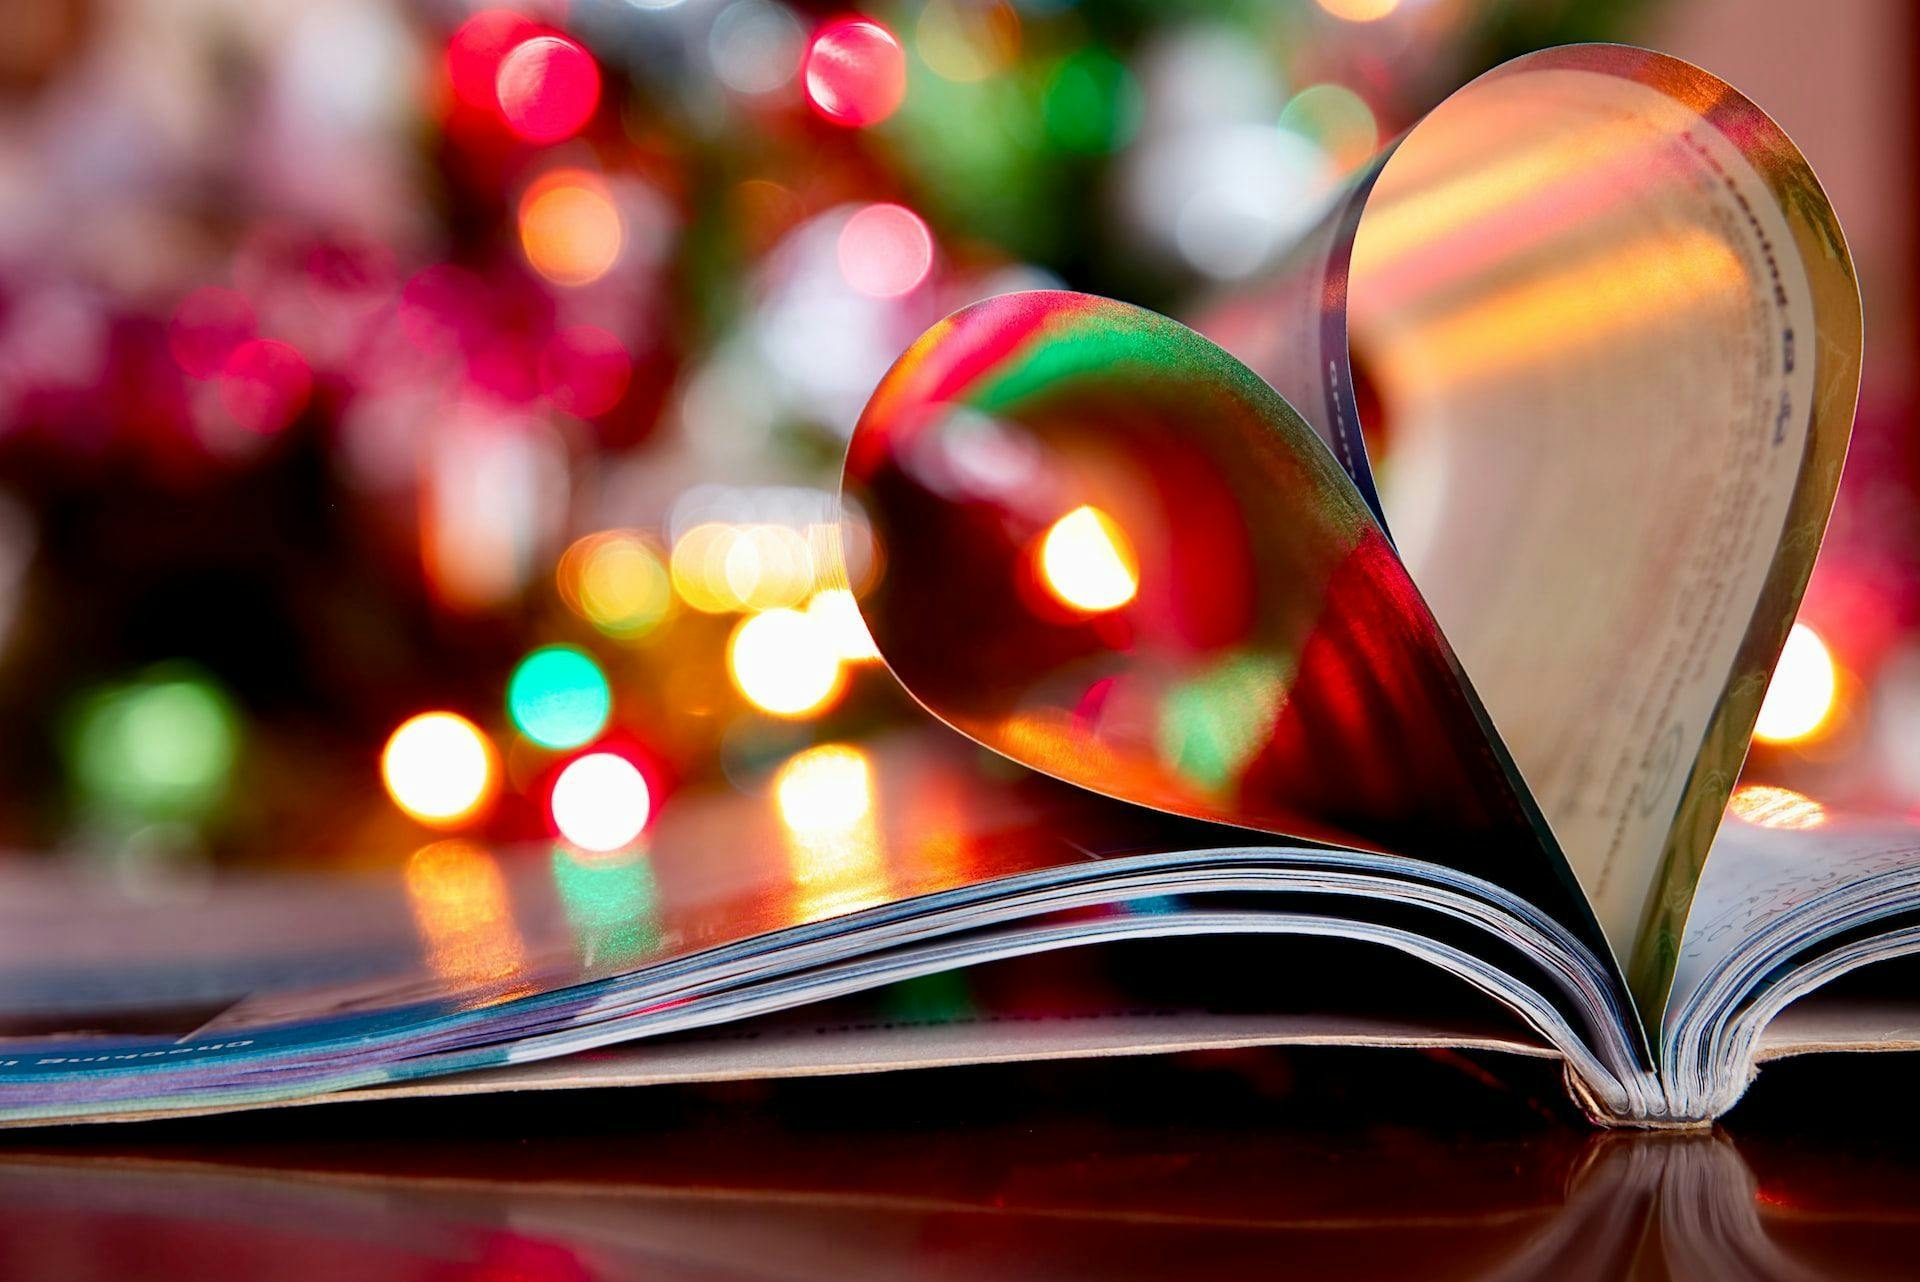 Books are a popular Christmas gift in Luxembourg